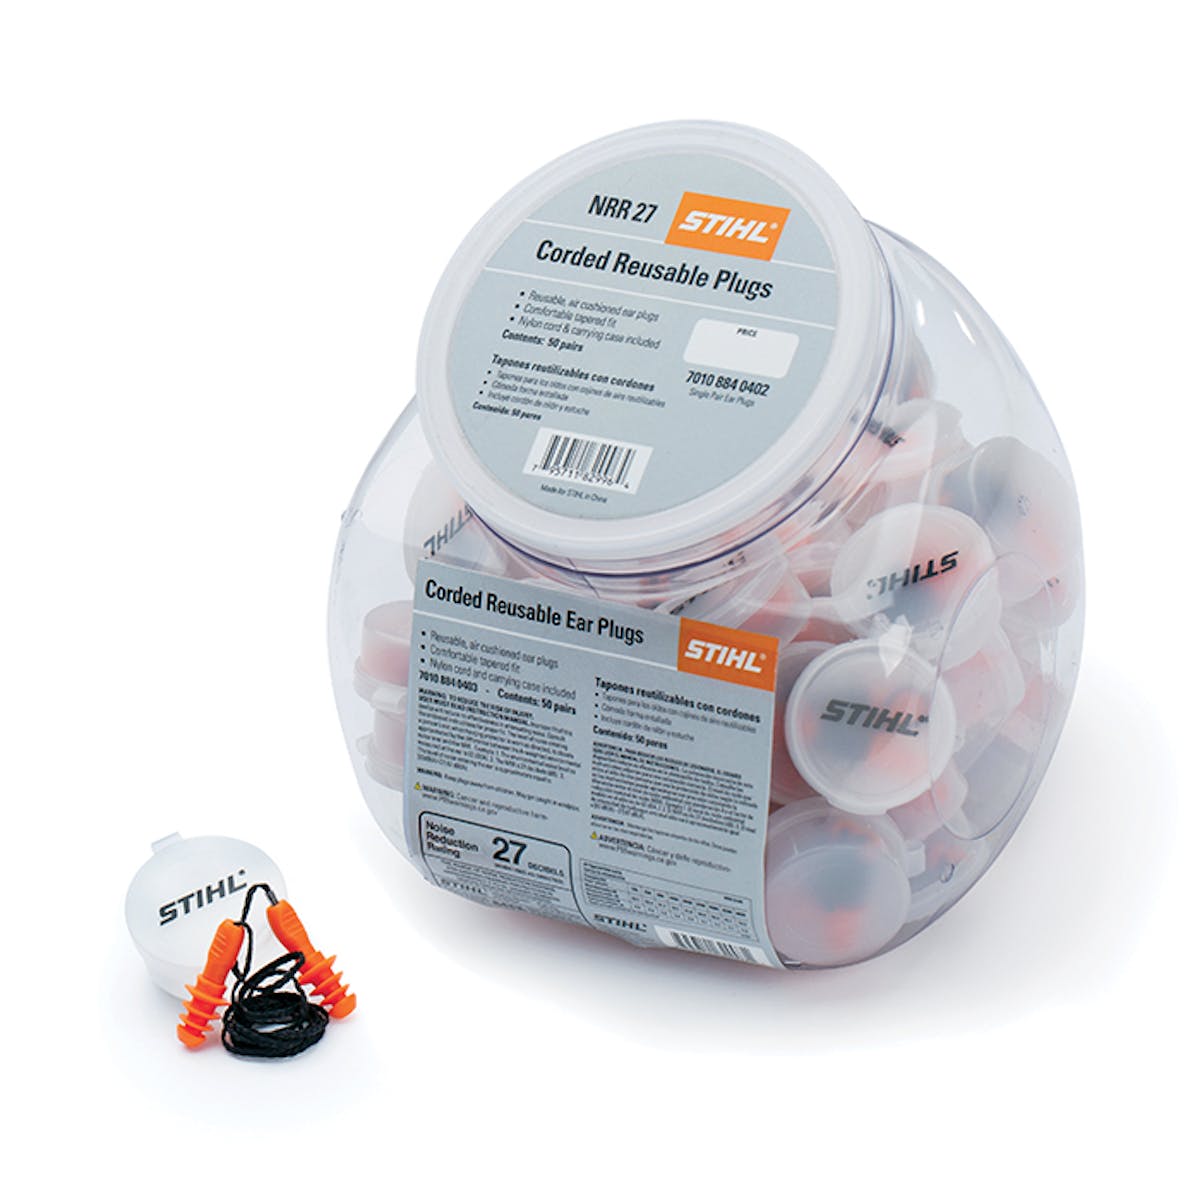 STIHL Hearing Protection - 50 Corded Pairs